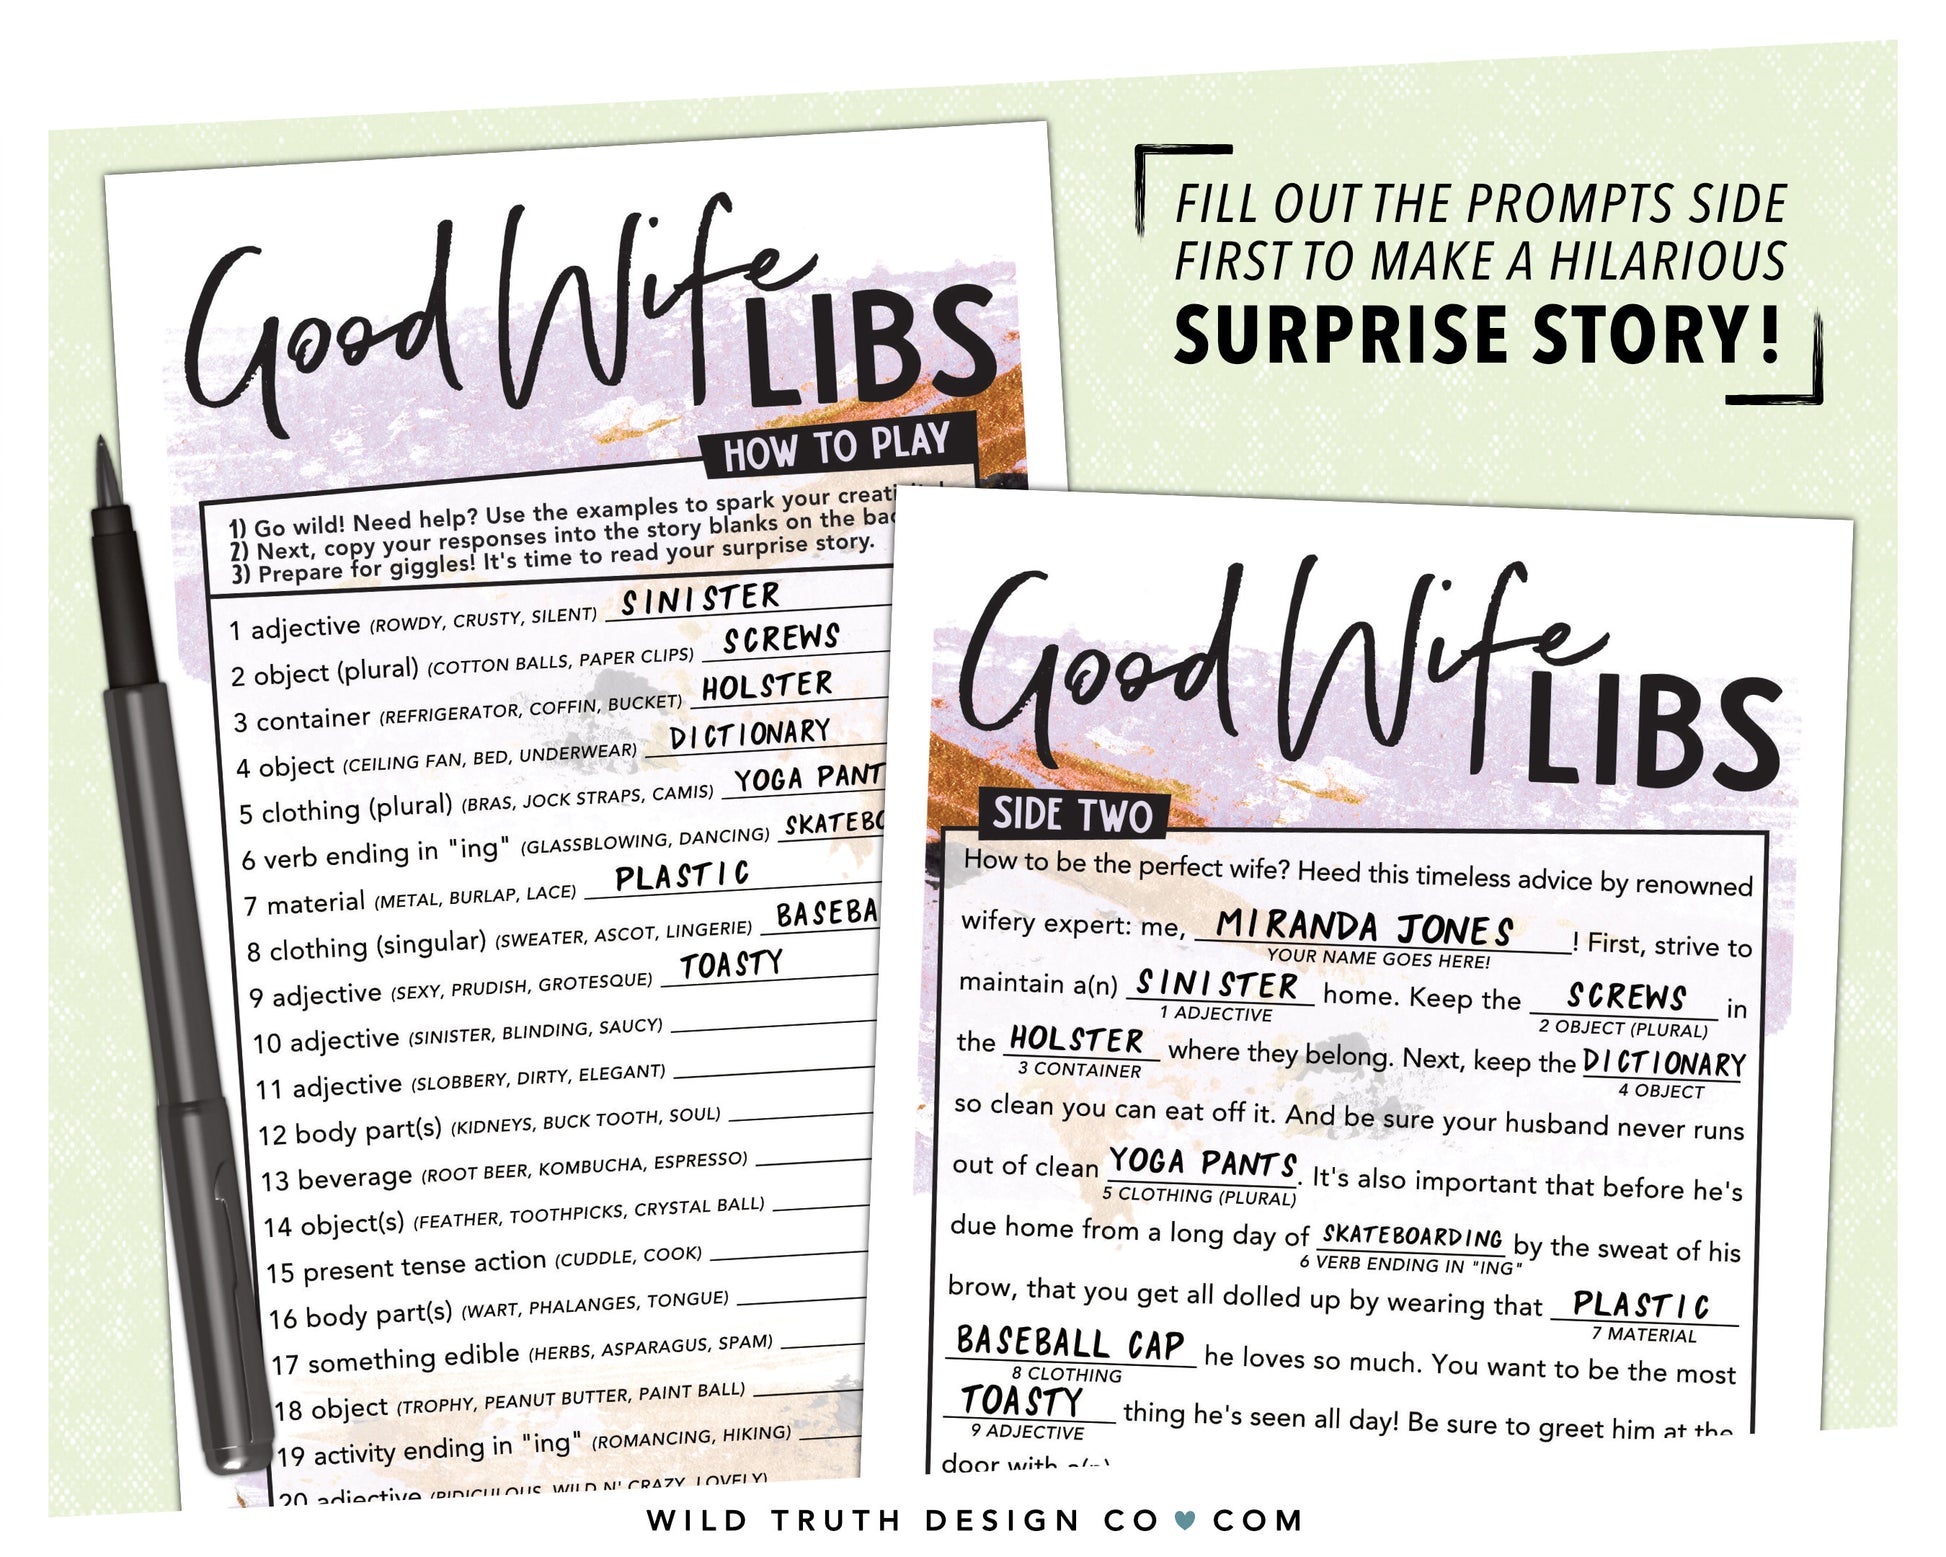 Good Wife Advice Madlib Game - Bachelorette Party, Bridal Shower, Lingerie  Party – Wild Truth Design Co